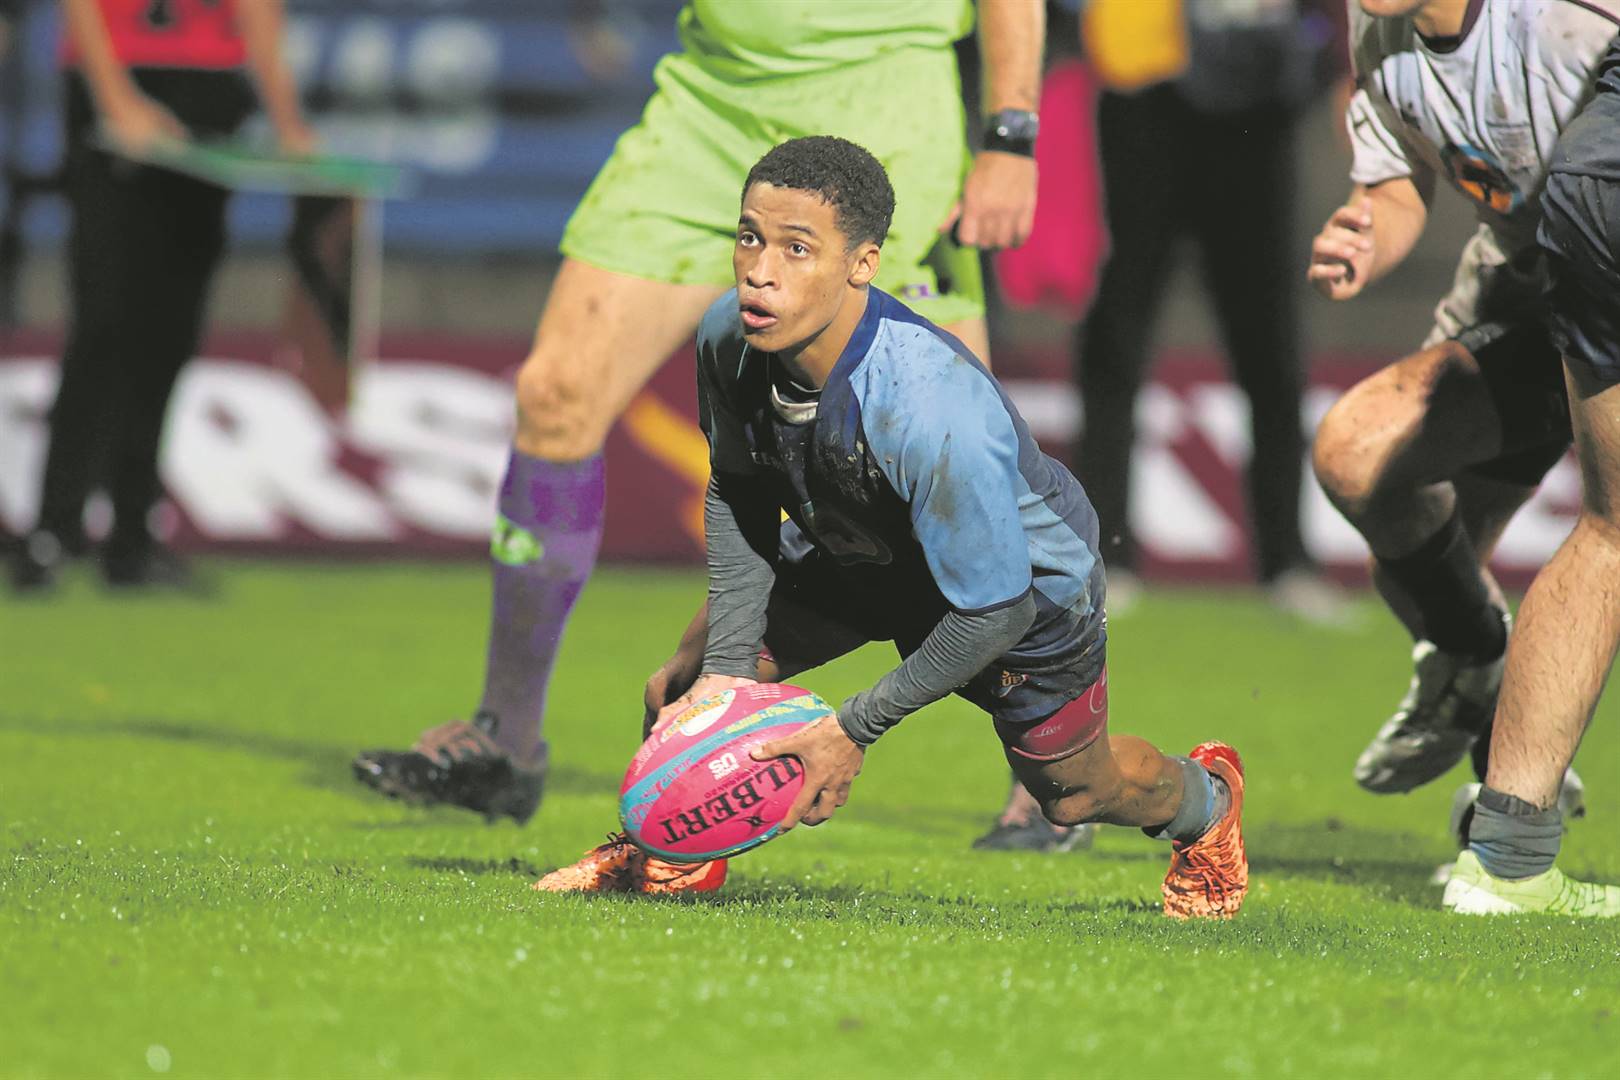 Raydon Swartbooi of the Central University of Technology (CUT), Free State, running with the ball during the match against the Stellenbosh University’s (SU) Maties at the CUT rugby stadium in Bloemfontein on 8 April.Photo: Supplied